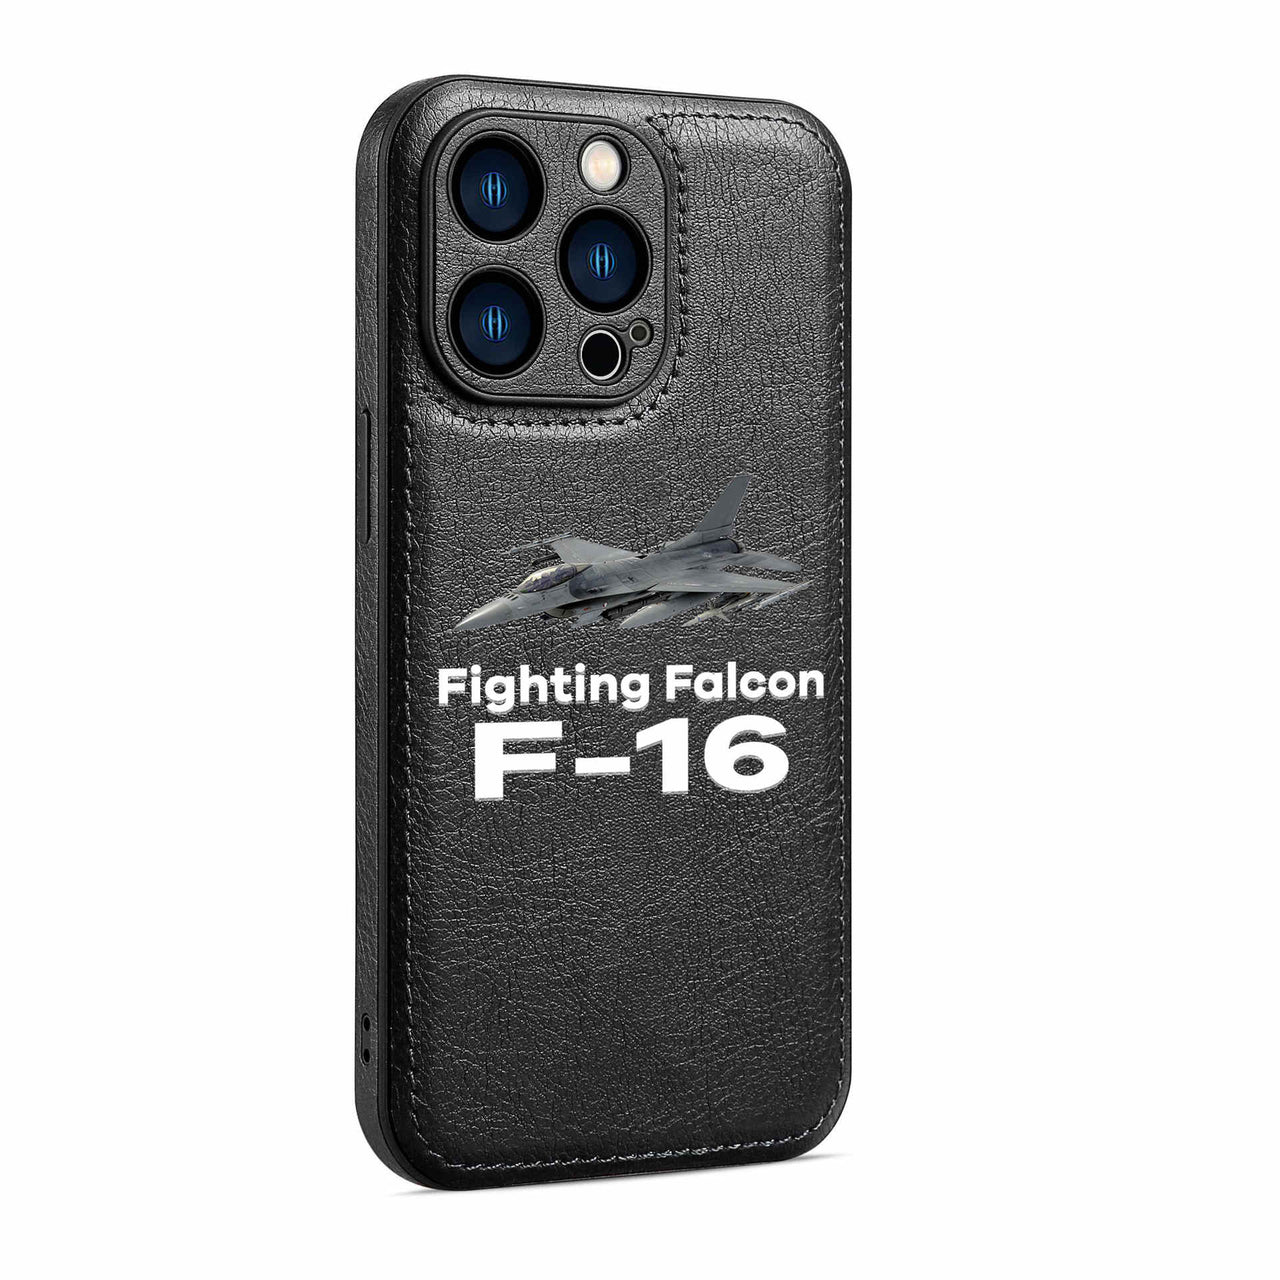 The Fighting Falcon F16 Designed Leather iPhone Cases